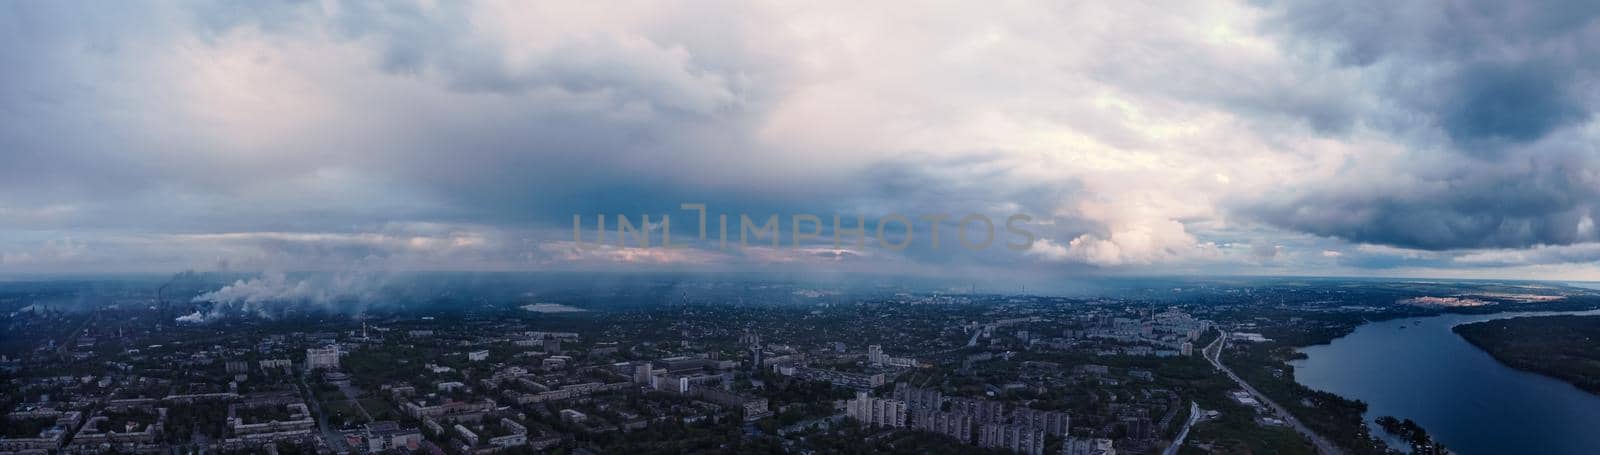 panoramic view of the city with river from above. Smog from industrial zone over city. aerial view on the city. panorama of city with clouds